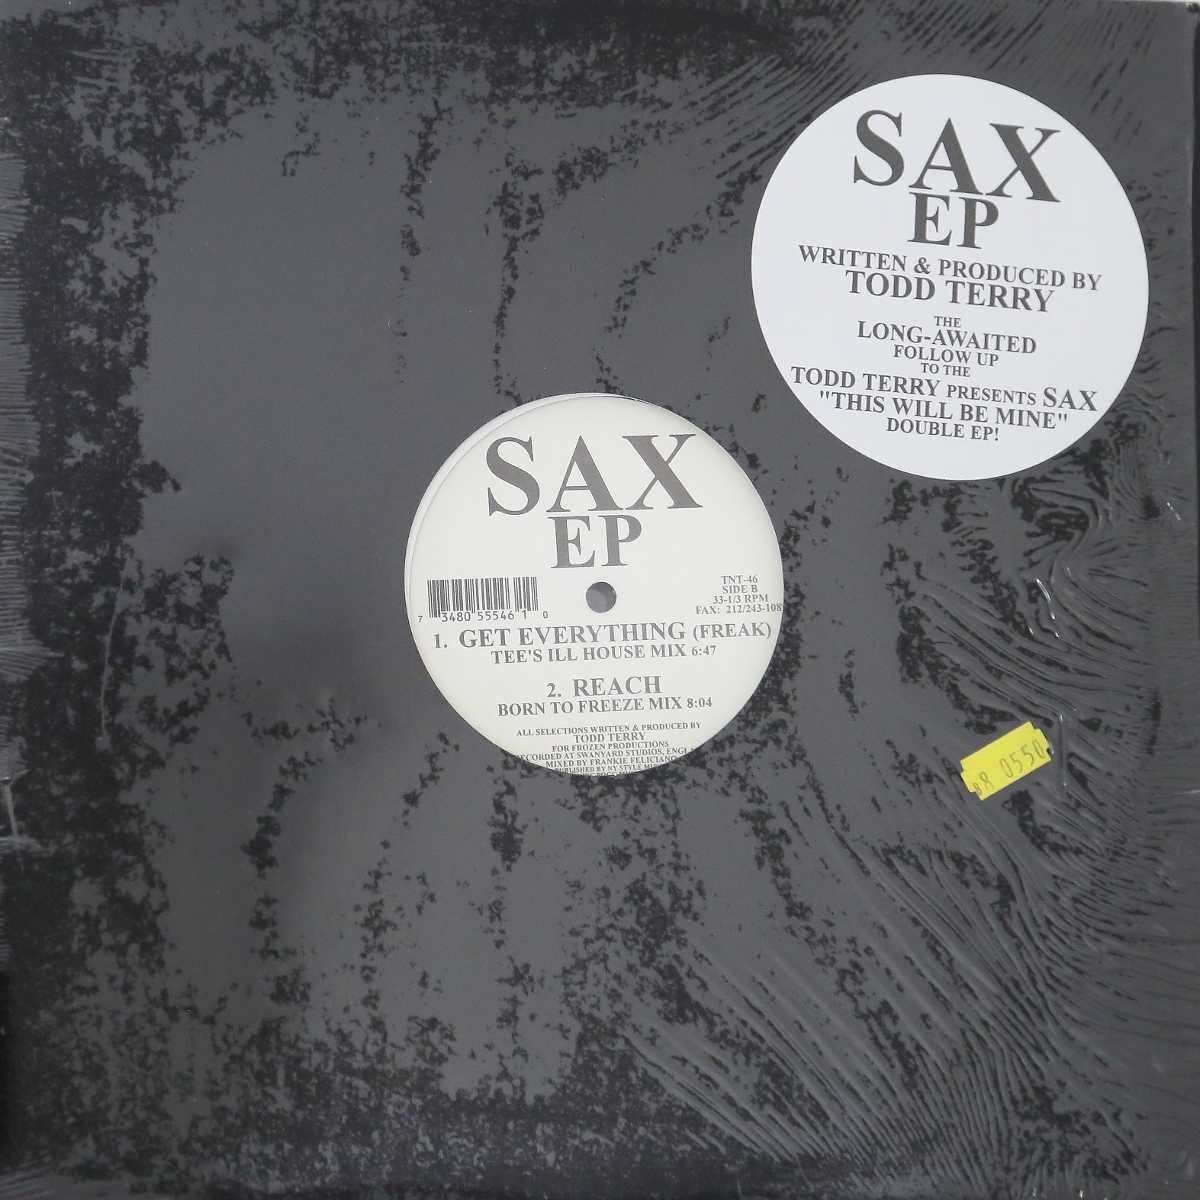 Todd Terry - Sax EP featuring Reach (2 mixes) / The music / Get everything (Vinyl 12" Record)